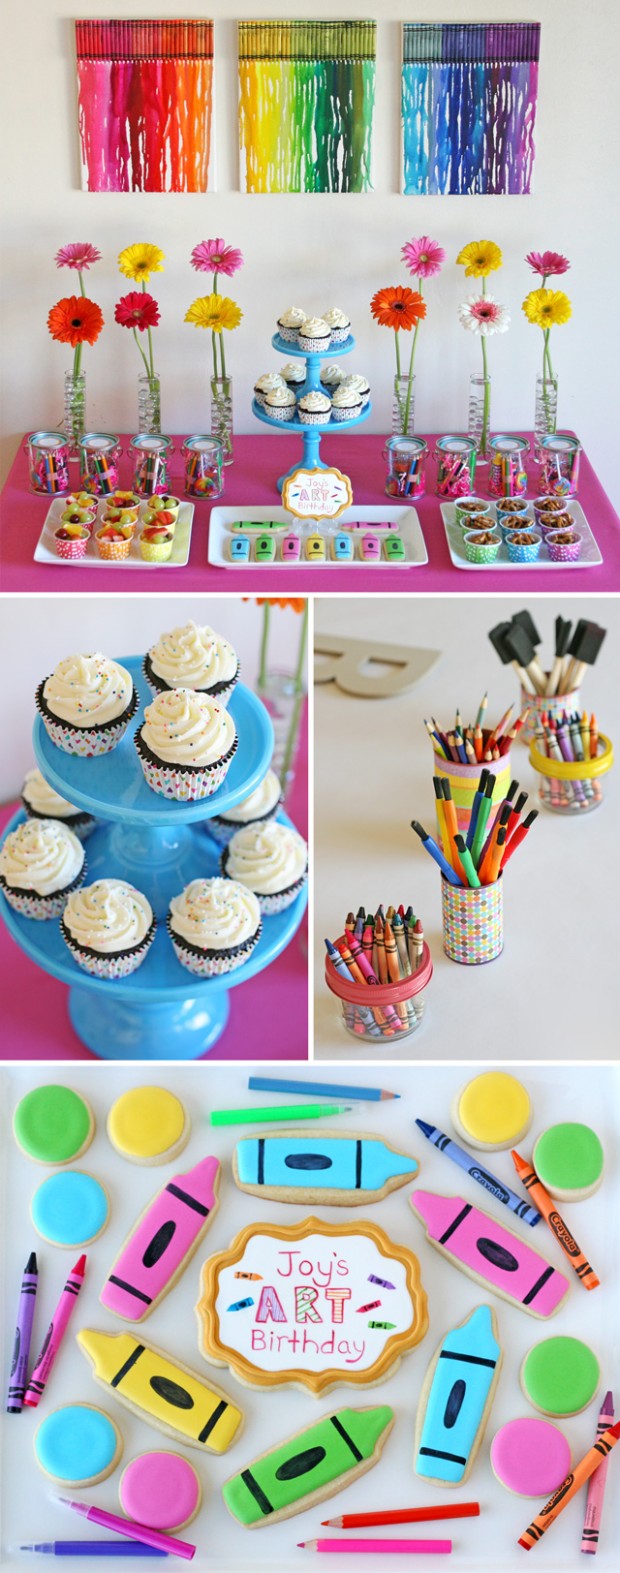 23 Cute and Fun Kids Birthday Party Decoration Ideas (21)